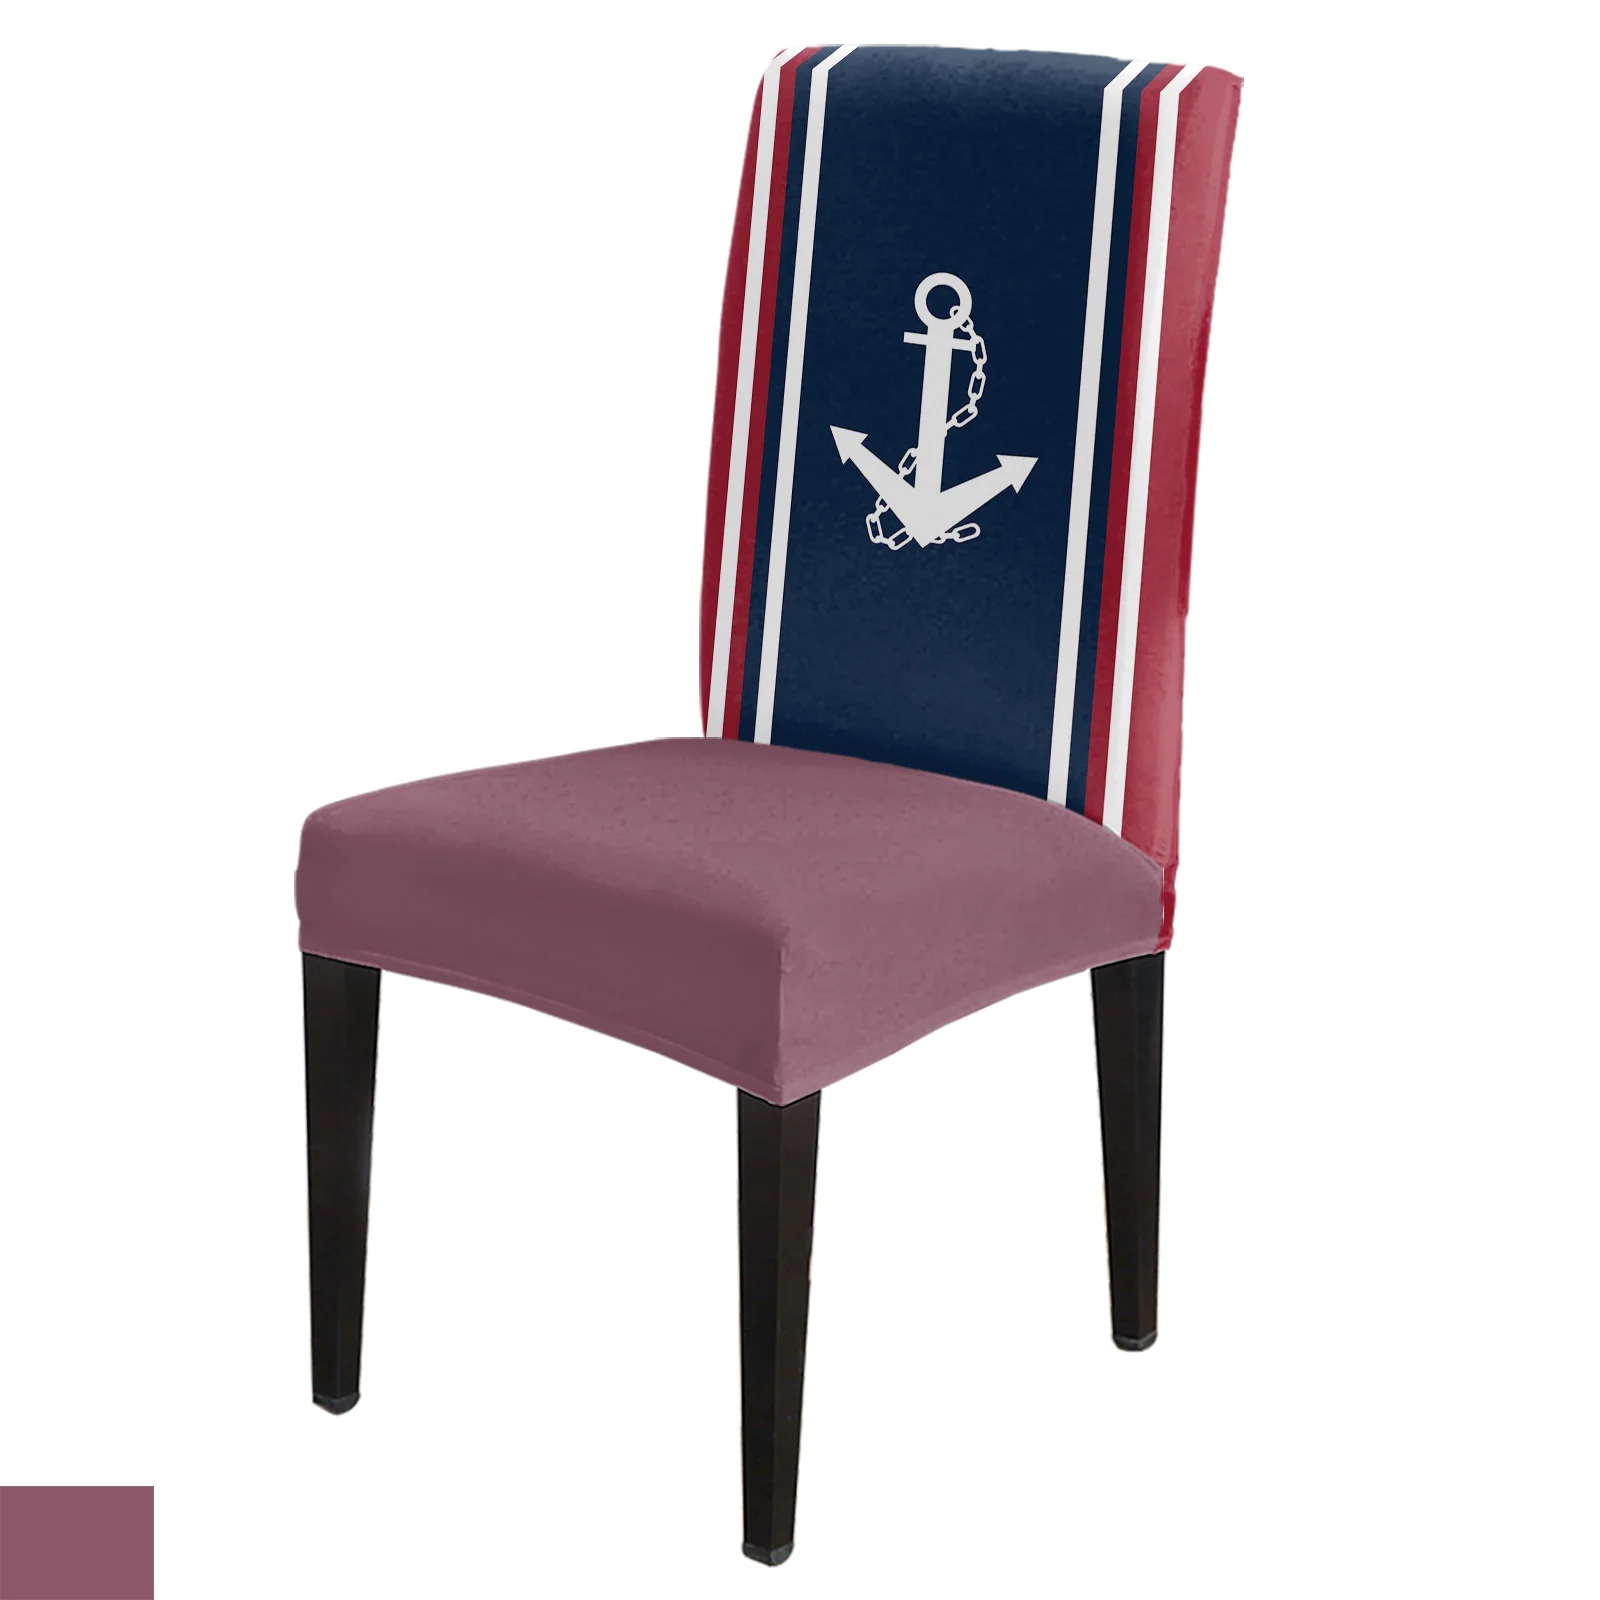 

Vertical Blue Red Stripe White Anchor Chair Cover Dining Spandex Stretch Seat Covers Home Office Decoration Desk Chair Case Set